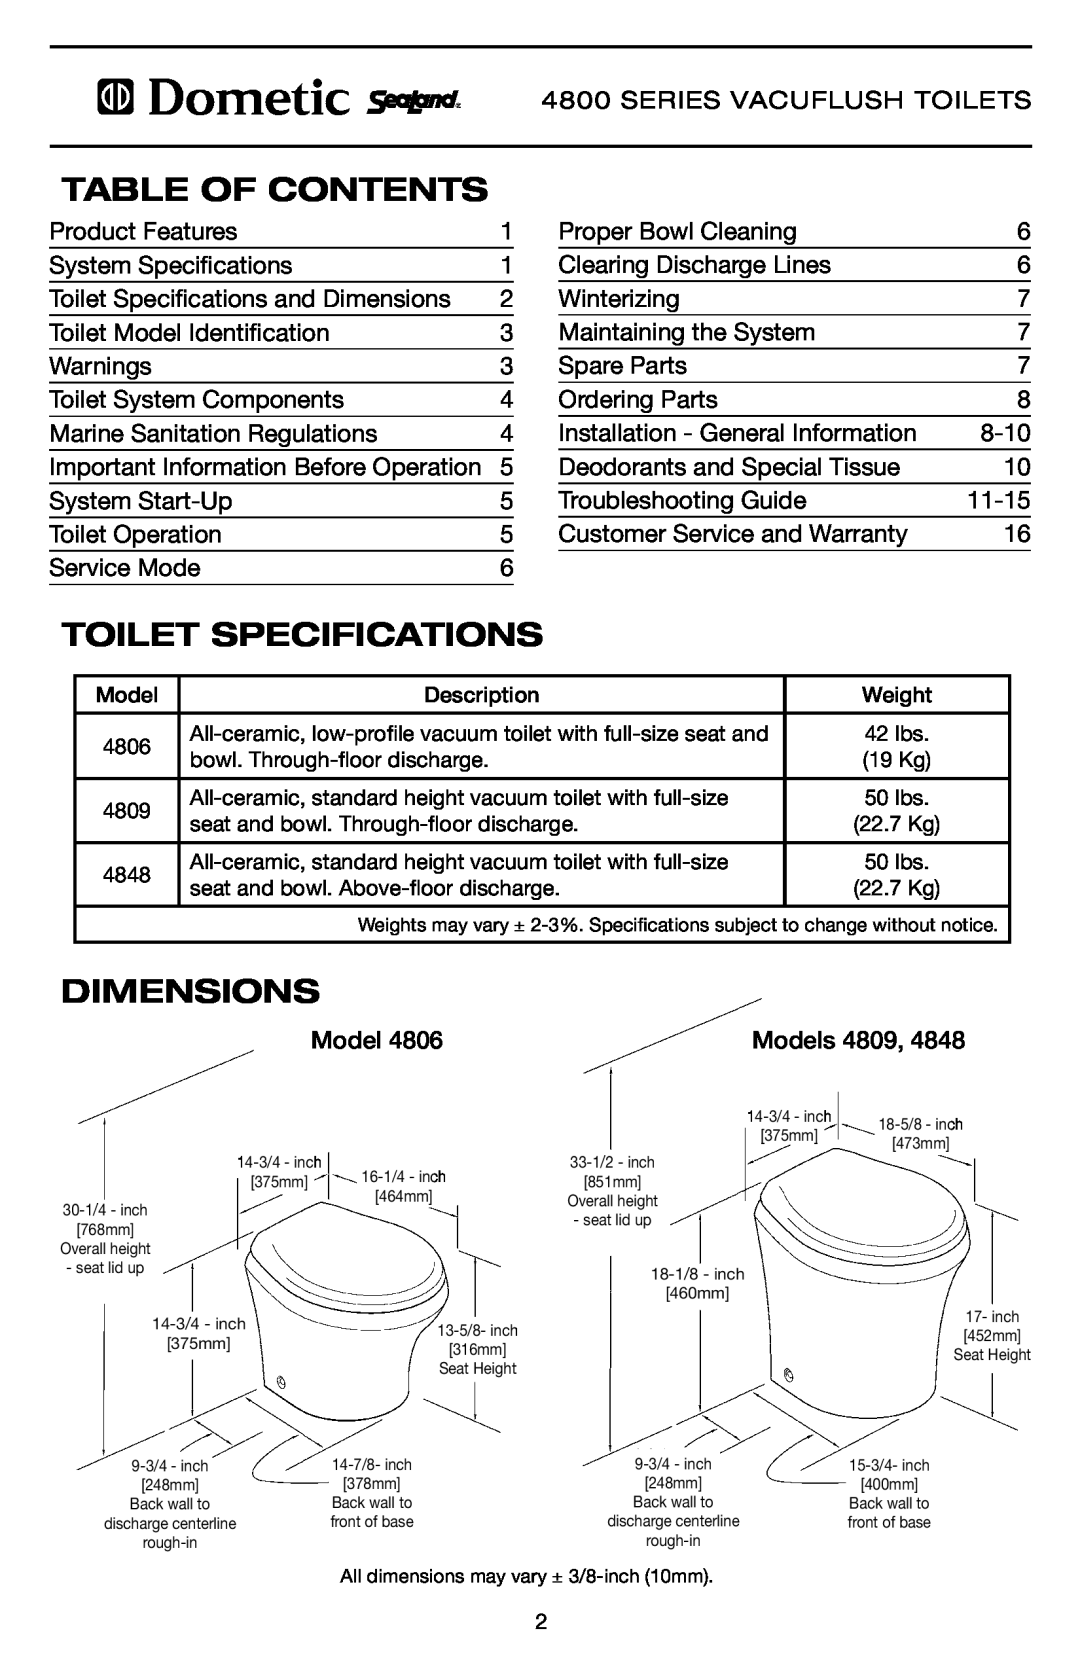 Dometic 4848, 4809, 4806 specifications Table of Contents, Toilet Specifications, Dimensions 